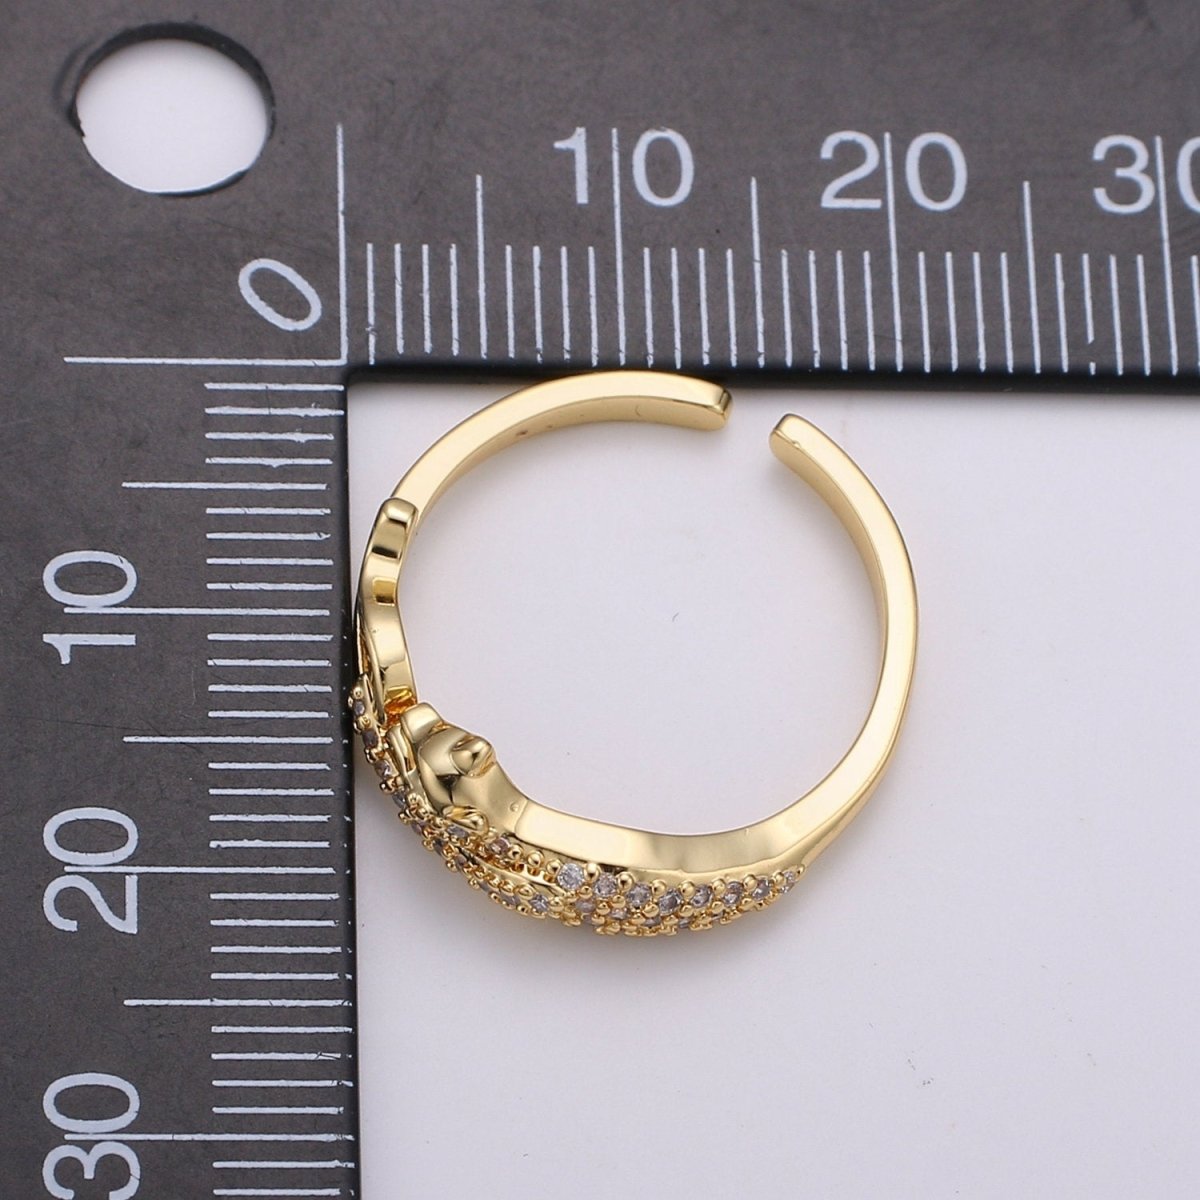 Panther ring, Cat ring, dainty ring, spiral Panther ring, gold ring, wrap ring, Leopard gold ring, vintage jewelry CZ Micro Pave Ring R-107 - DLUXCA